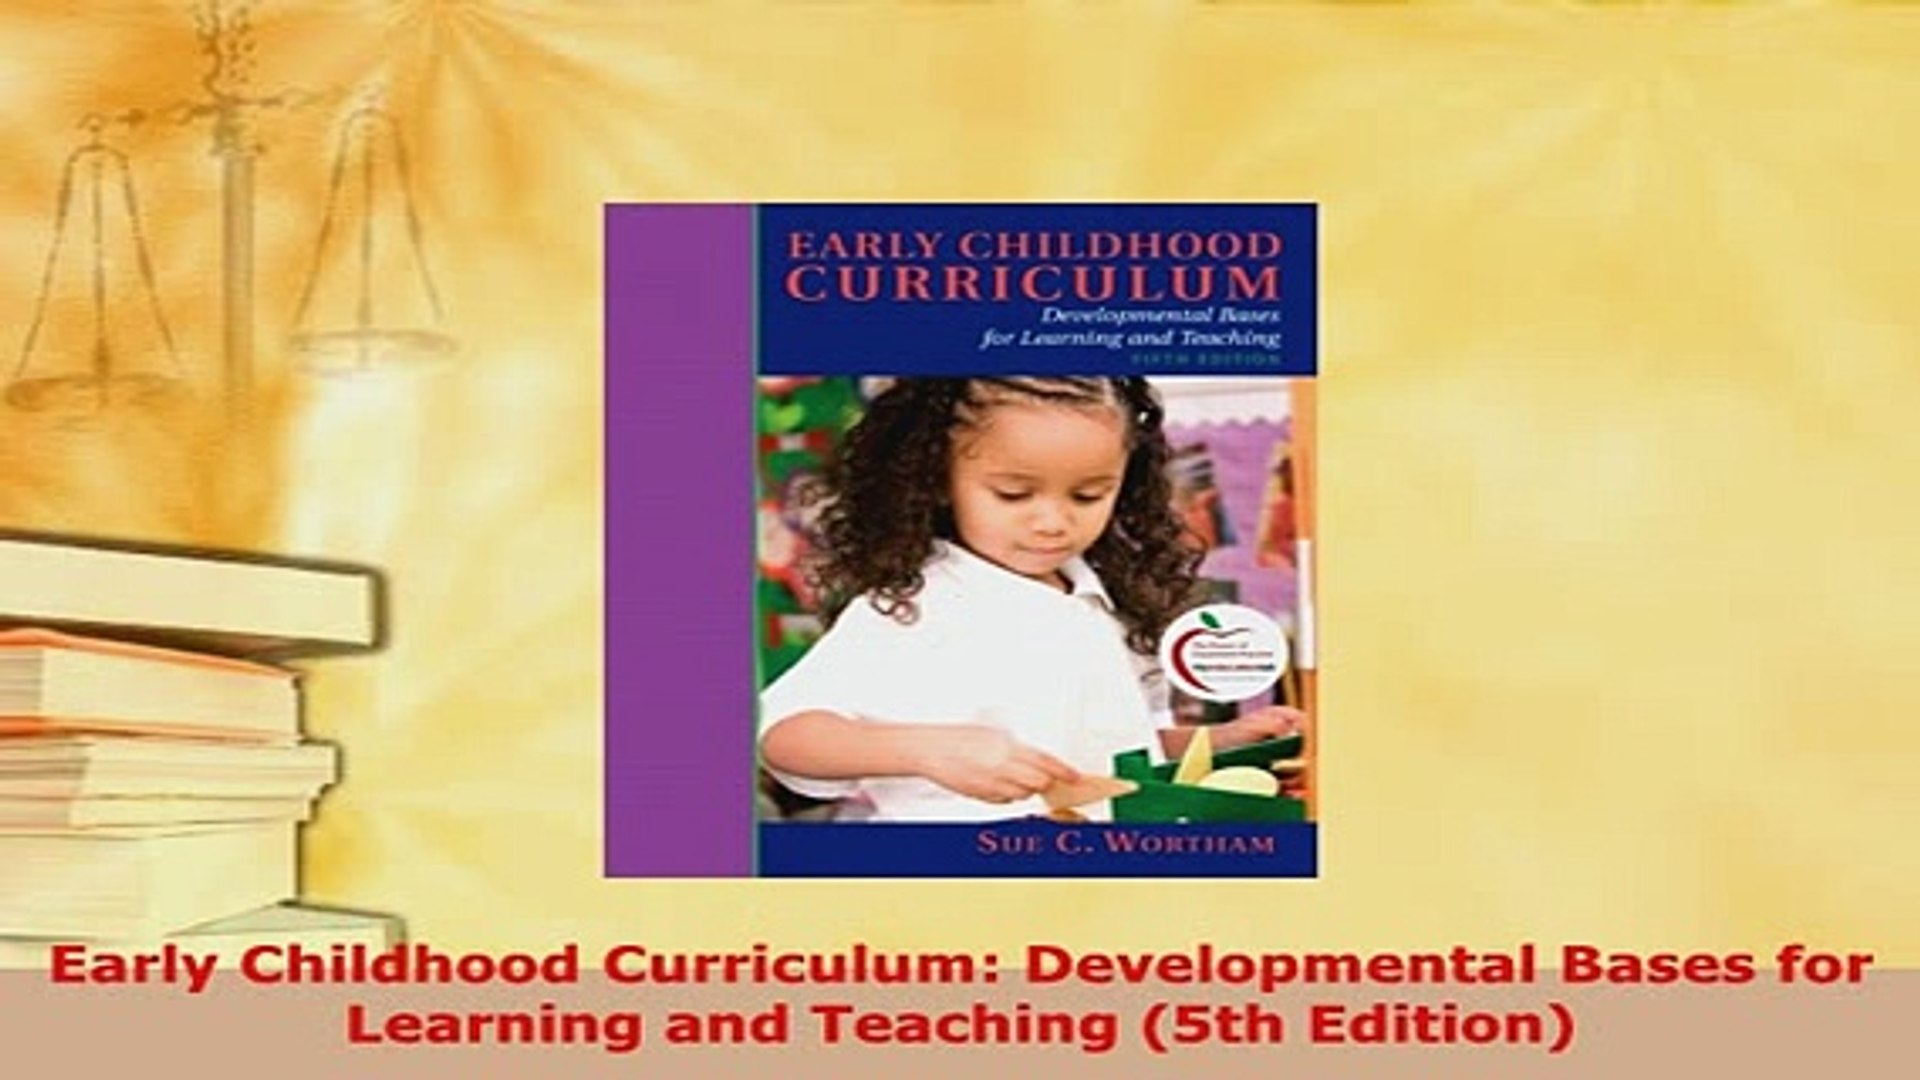 Pdf Early Childhood Curriculum Developmental Bases For Learning And Teaching 5th Edition Download Online - 